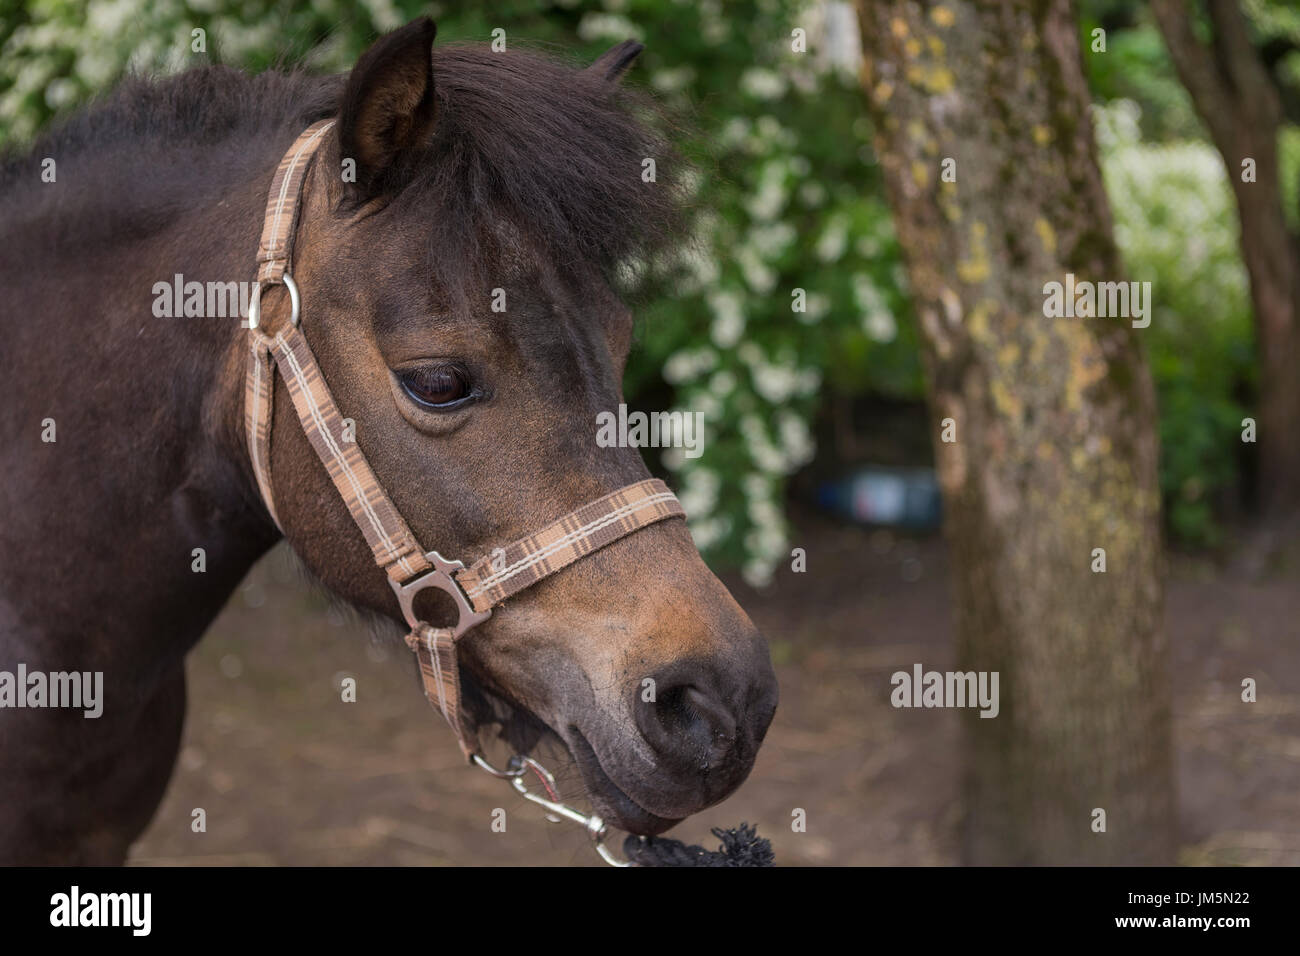 A portrait of a miniature horse of the Falabella breed, one of the smallest horses. Stock Photo